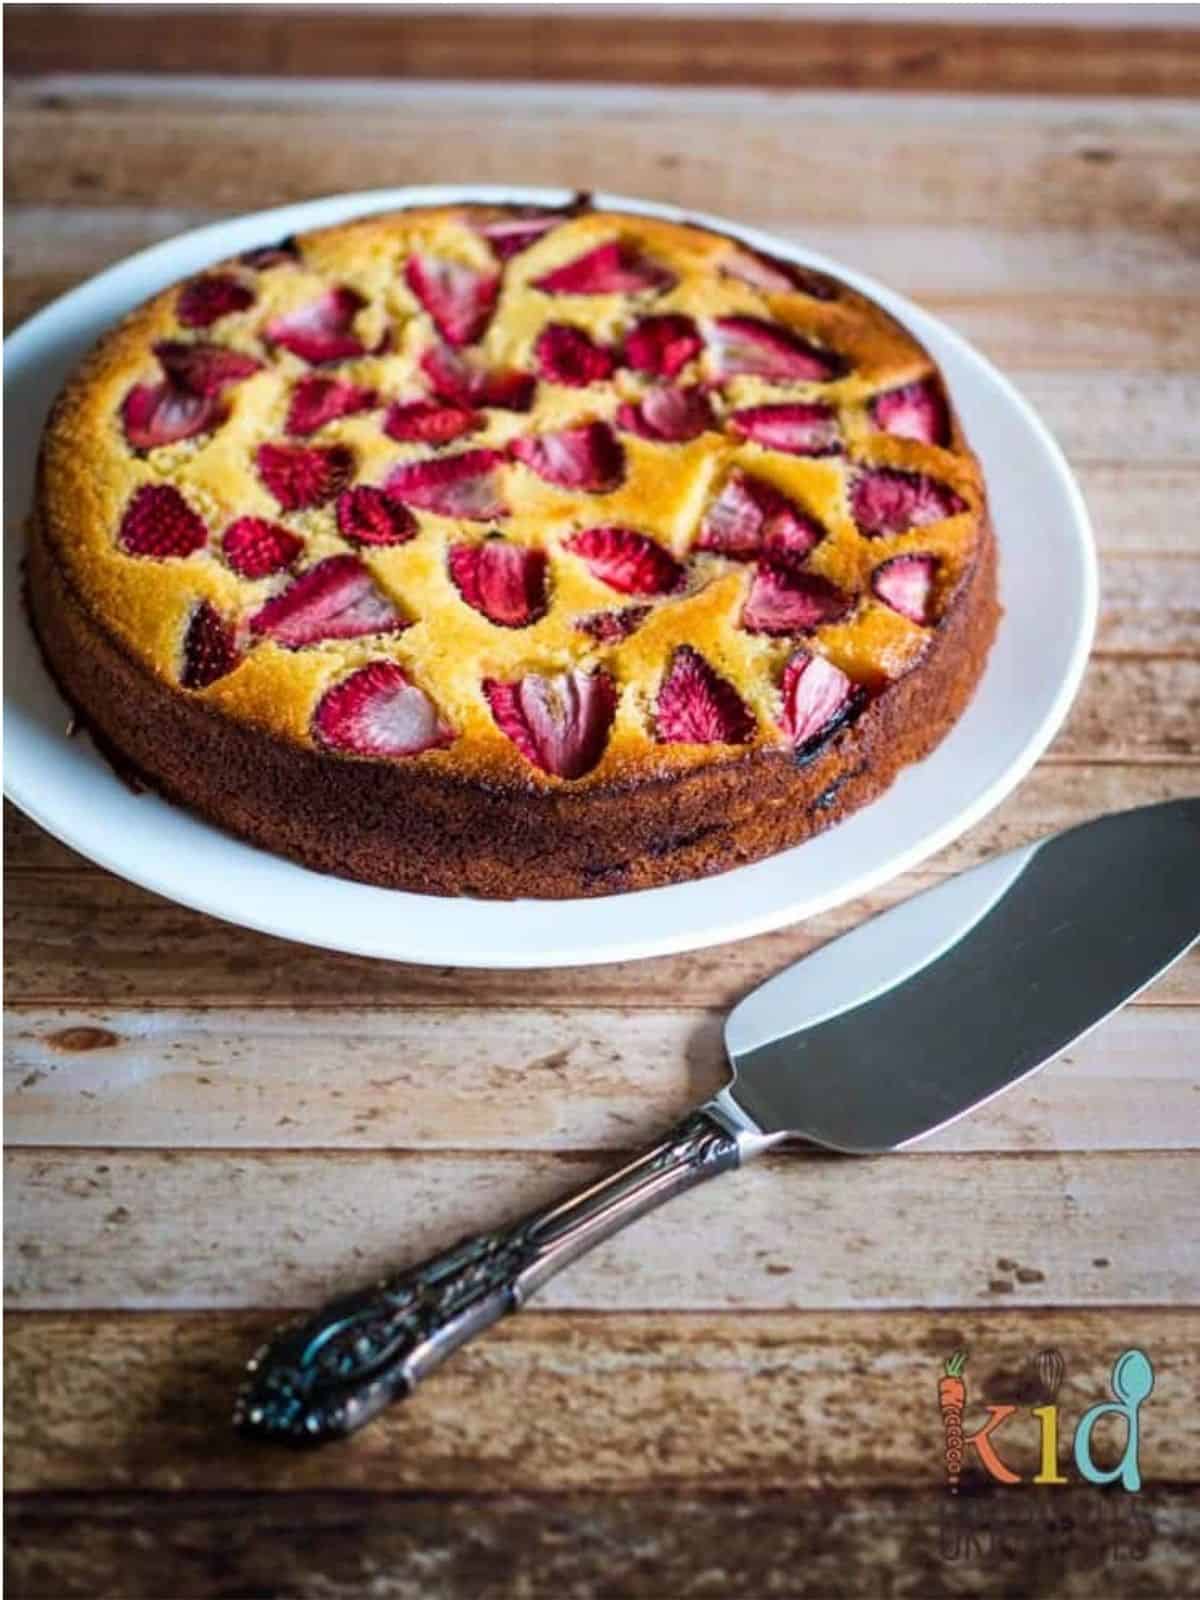 strawberry and lemon polenta cake on a plate with a serving utensil.